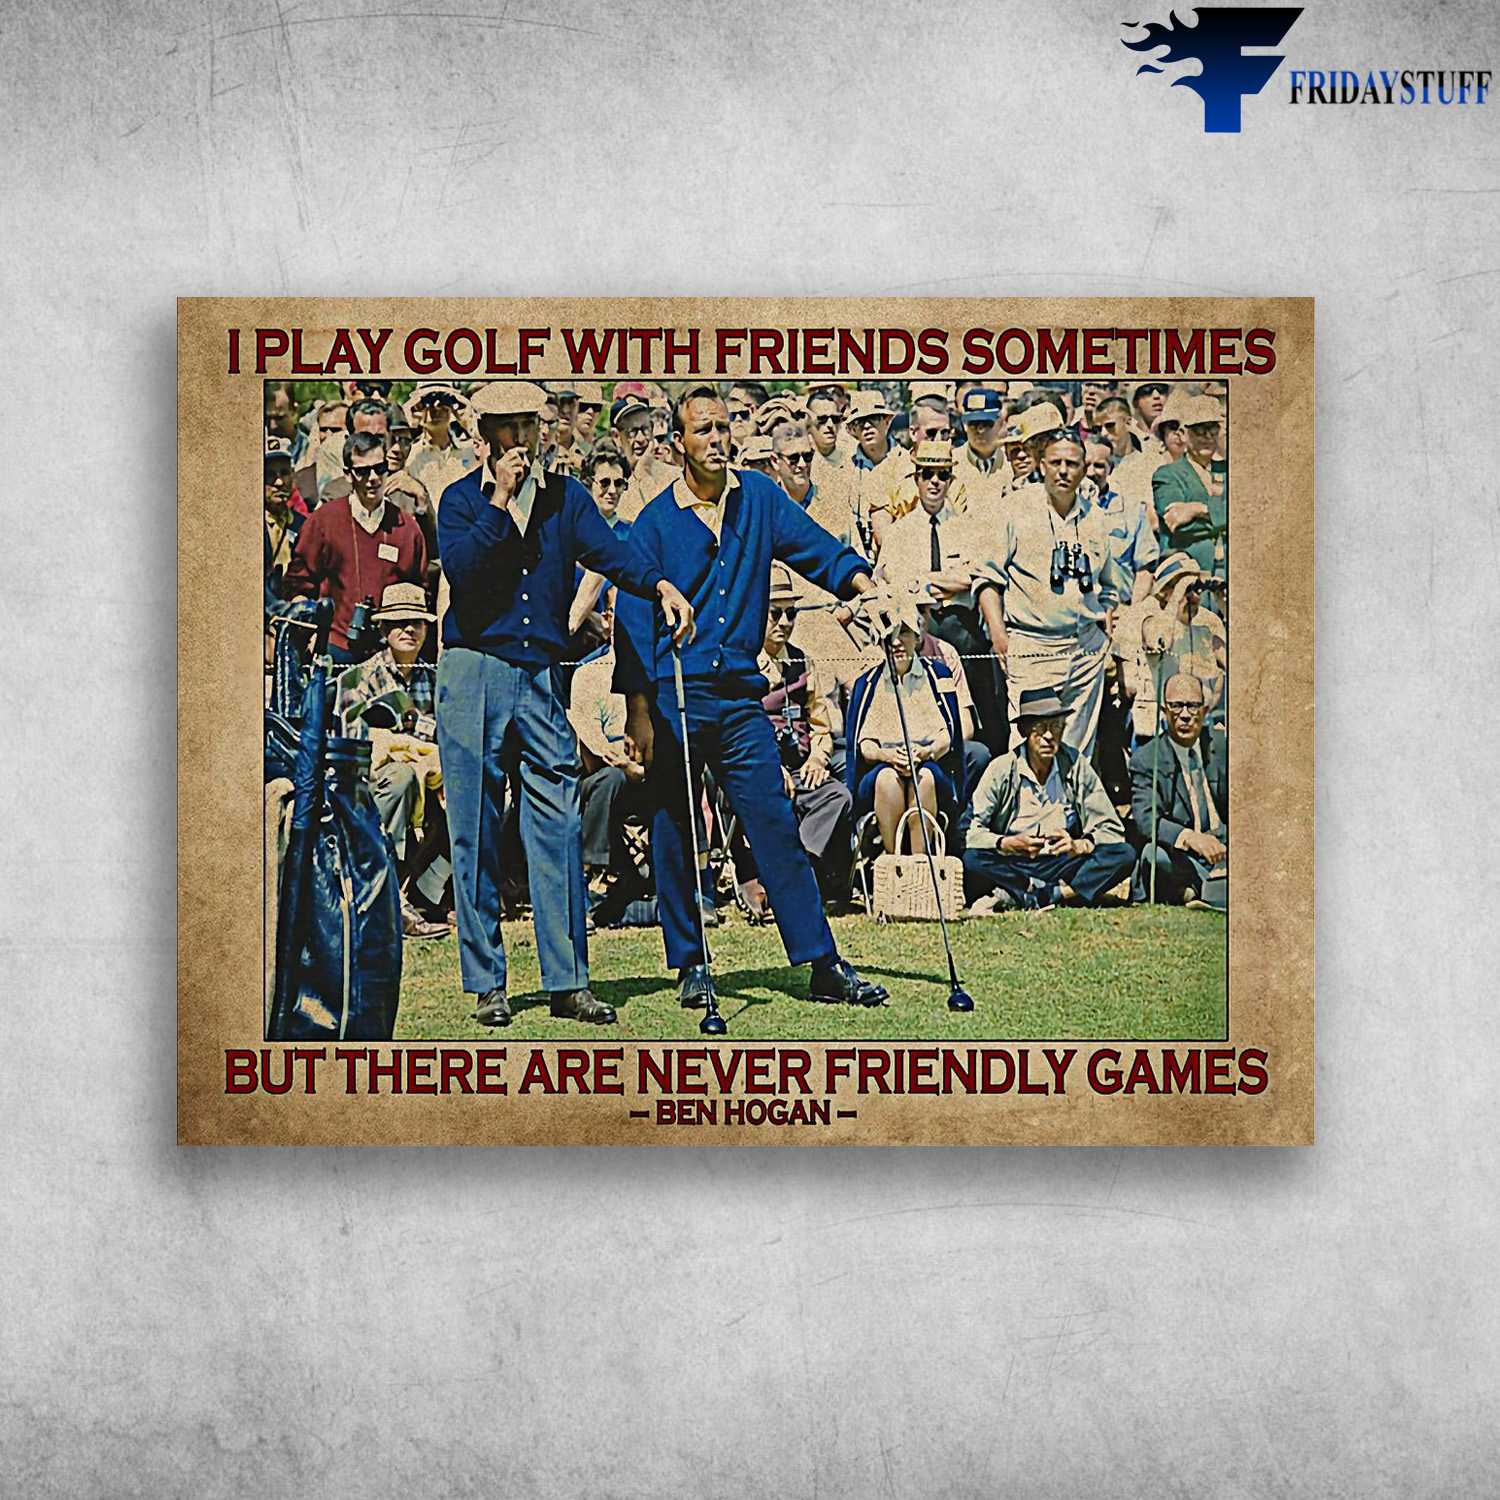 Golf Player - I Play Golf With Friends Sometimes, But There Are Never Friendly Games